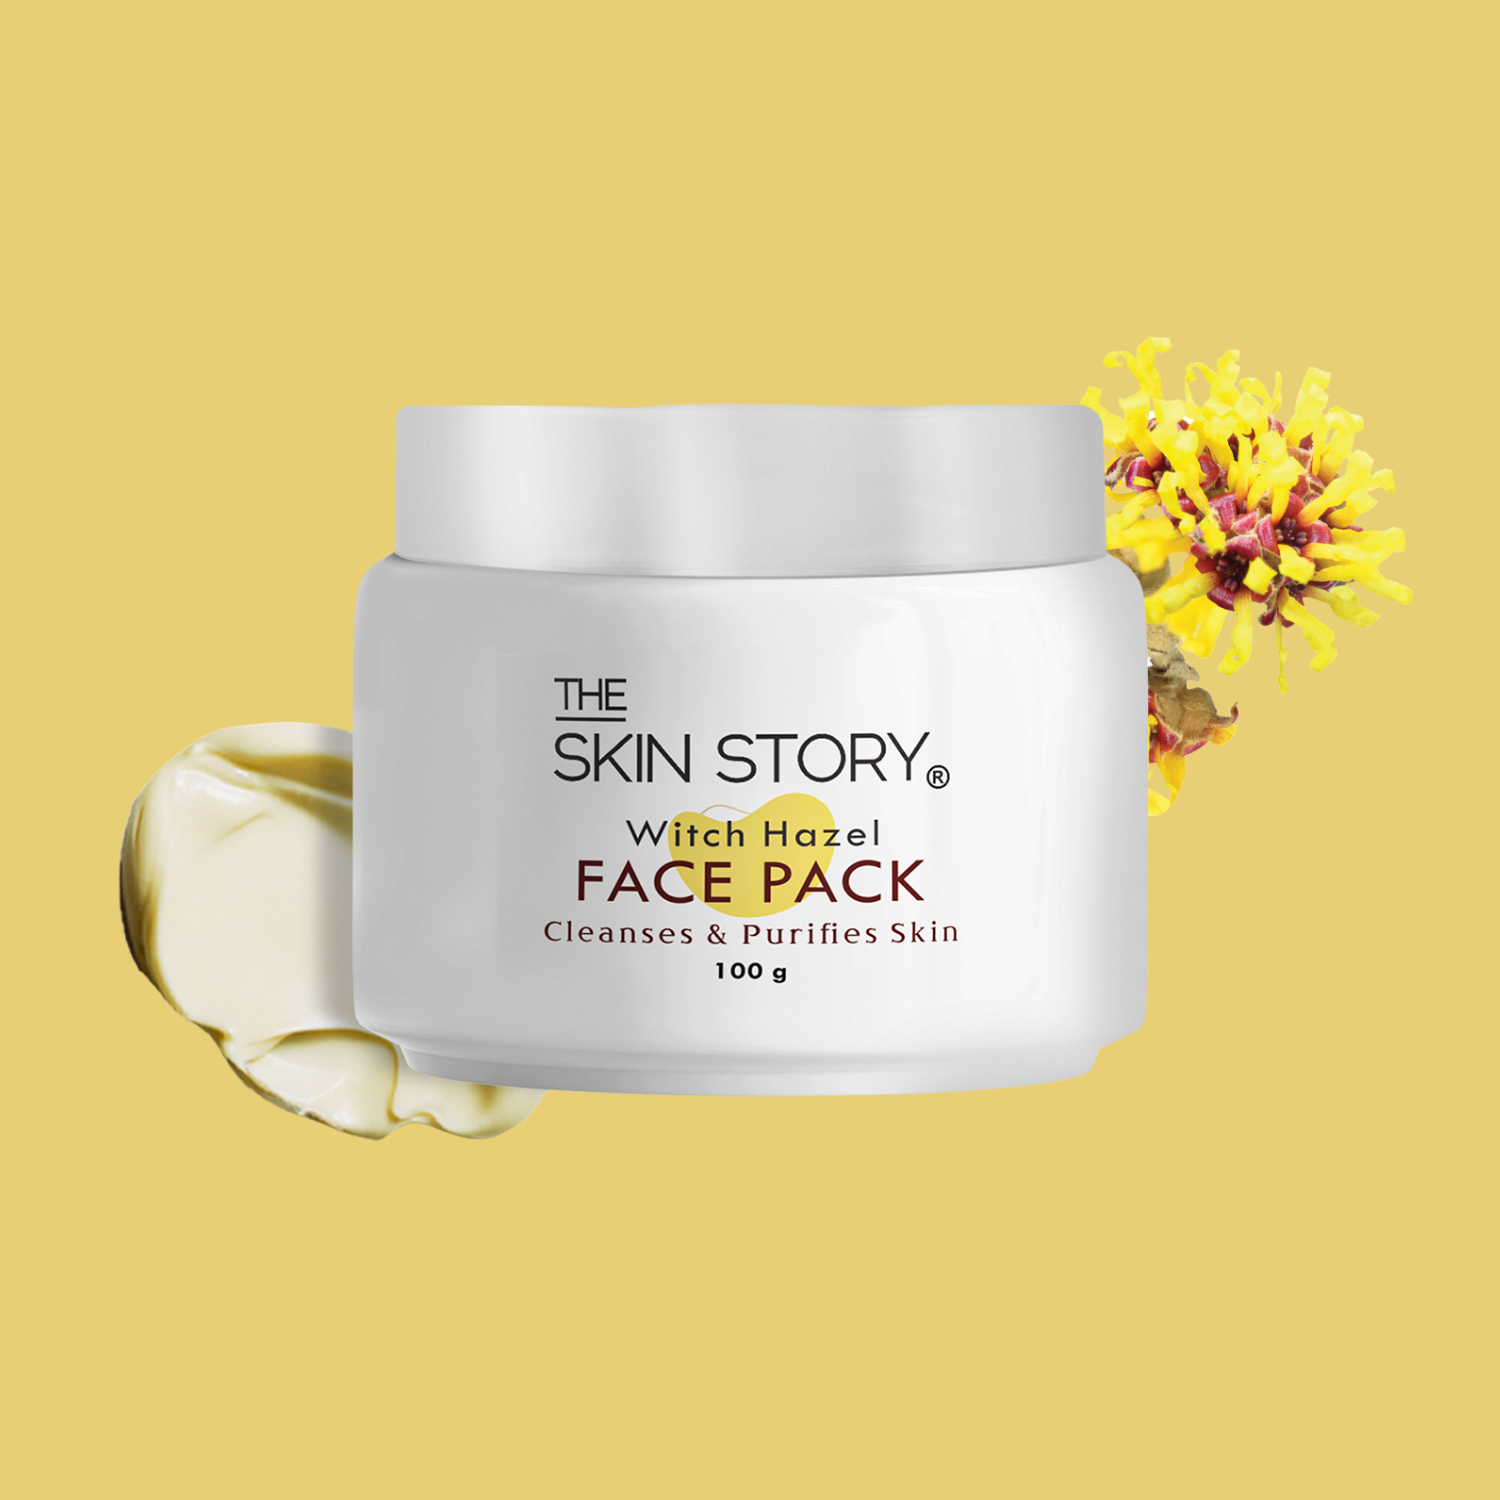 Deep Cleansing Face Pack | Dead Skin Removal | Normal to Oily Skin | Infused with Witch Hazel | 100g